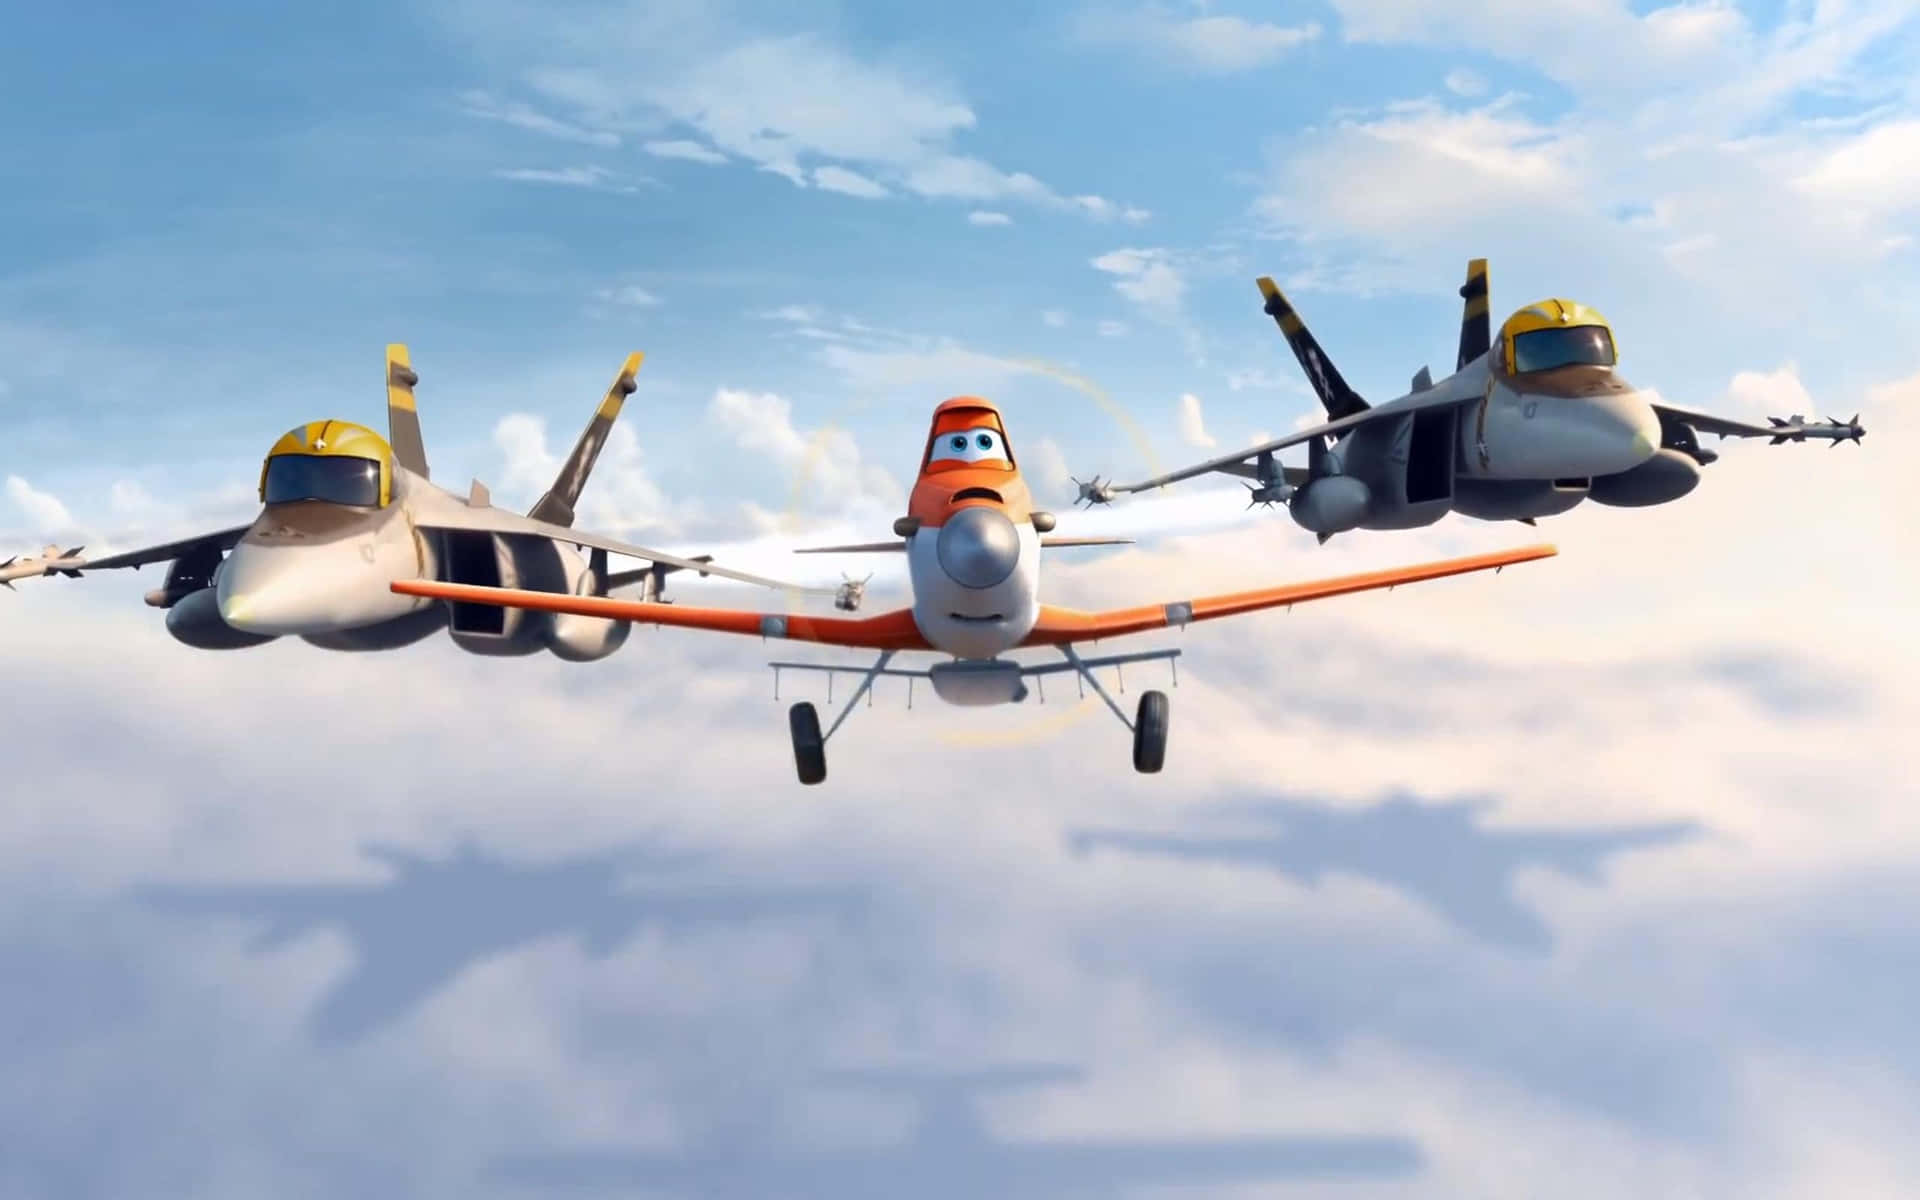 Soaring High With Disney's Planes Wallpaper